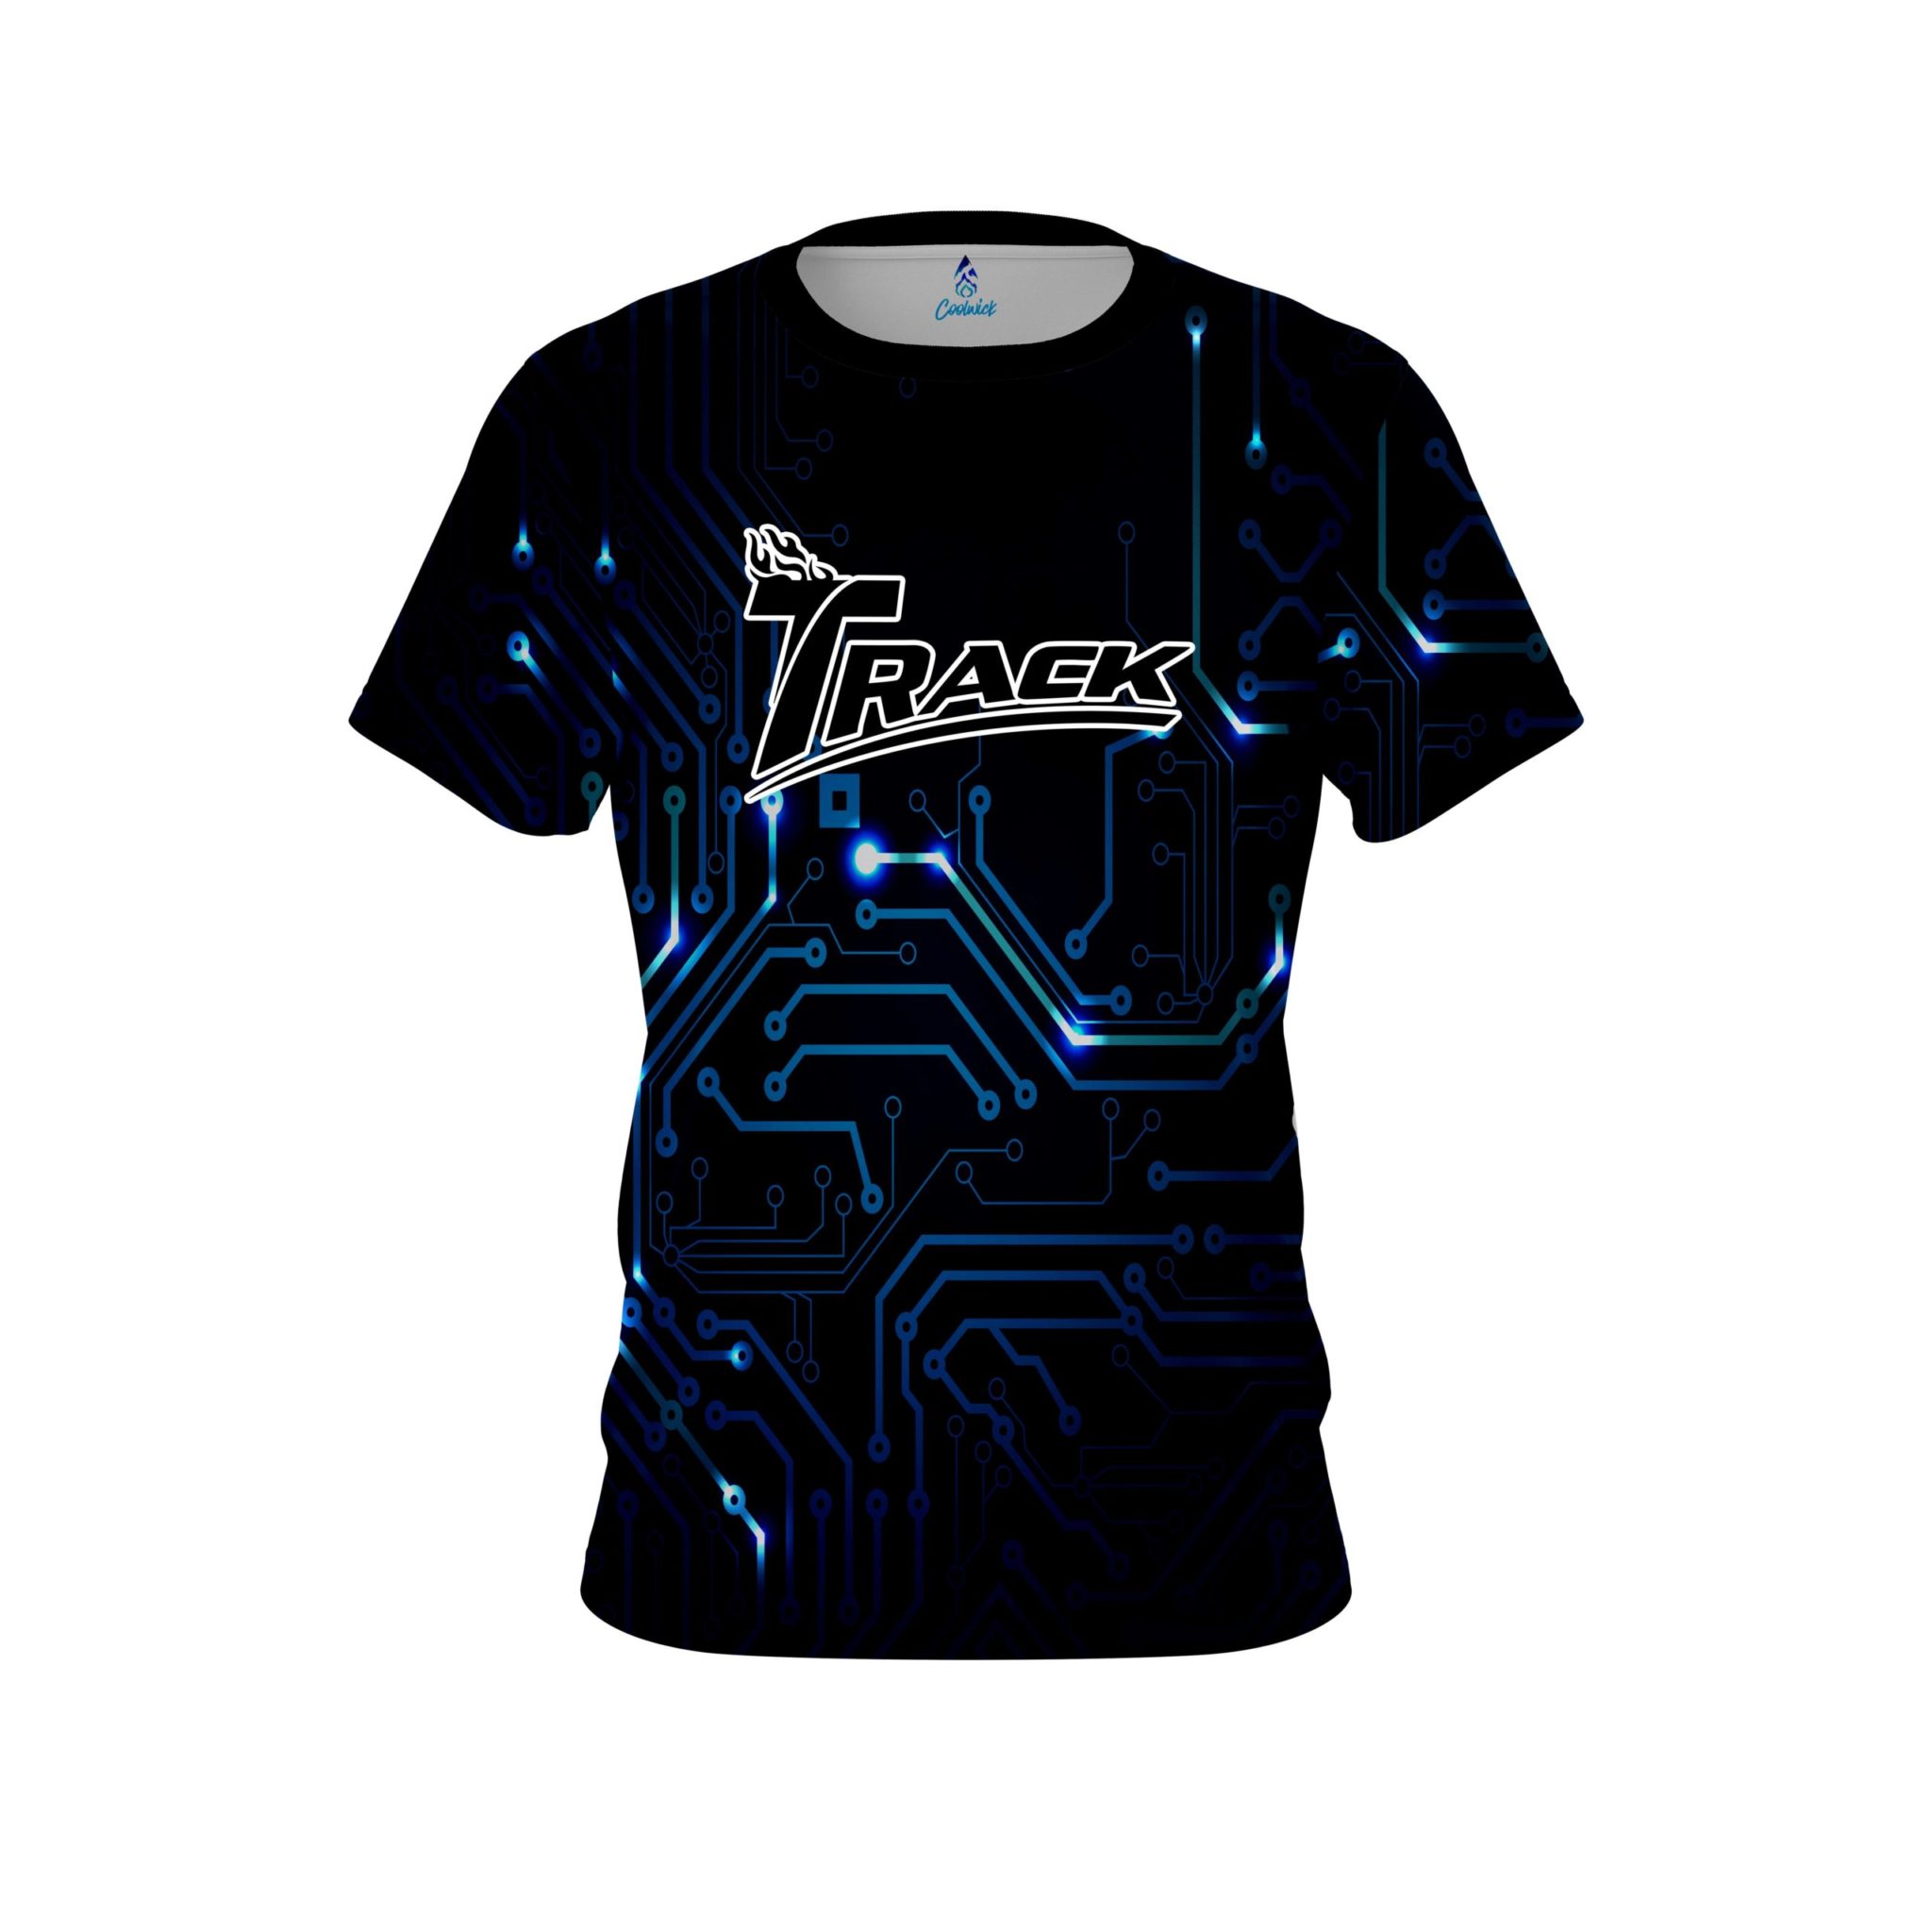 Track Circuit CoolWick Bowling Jersey